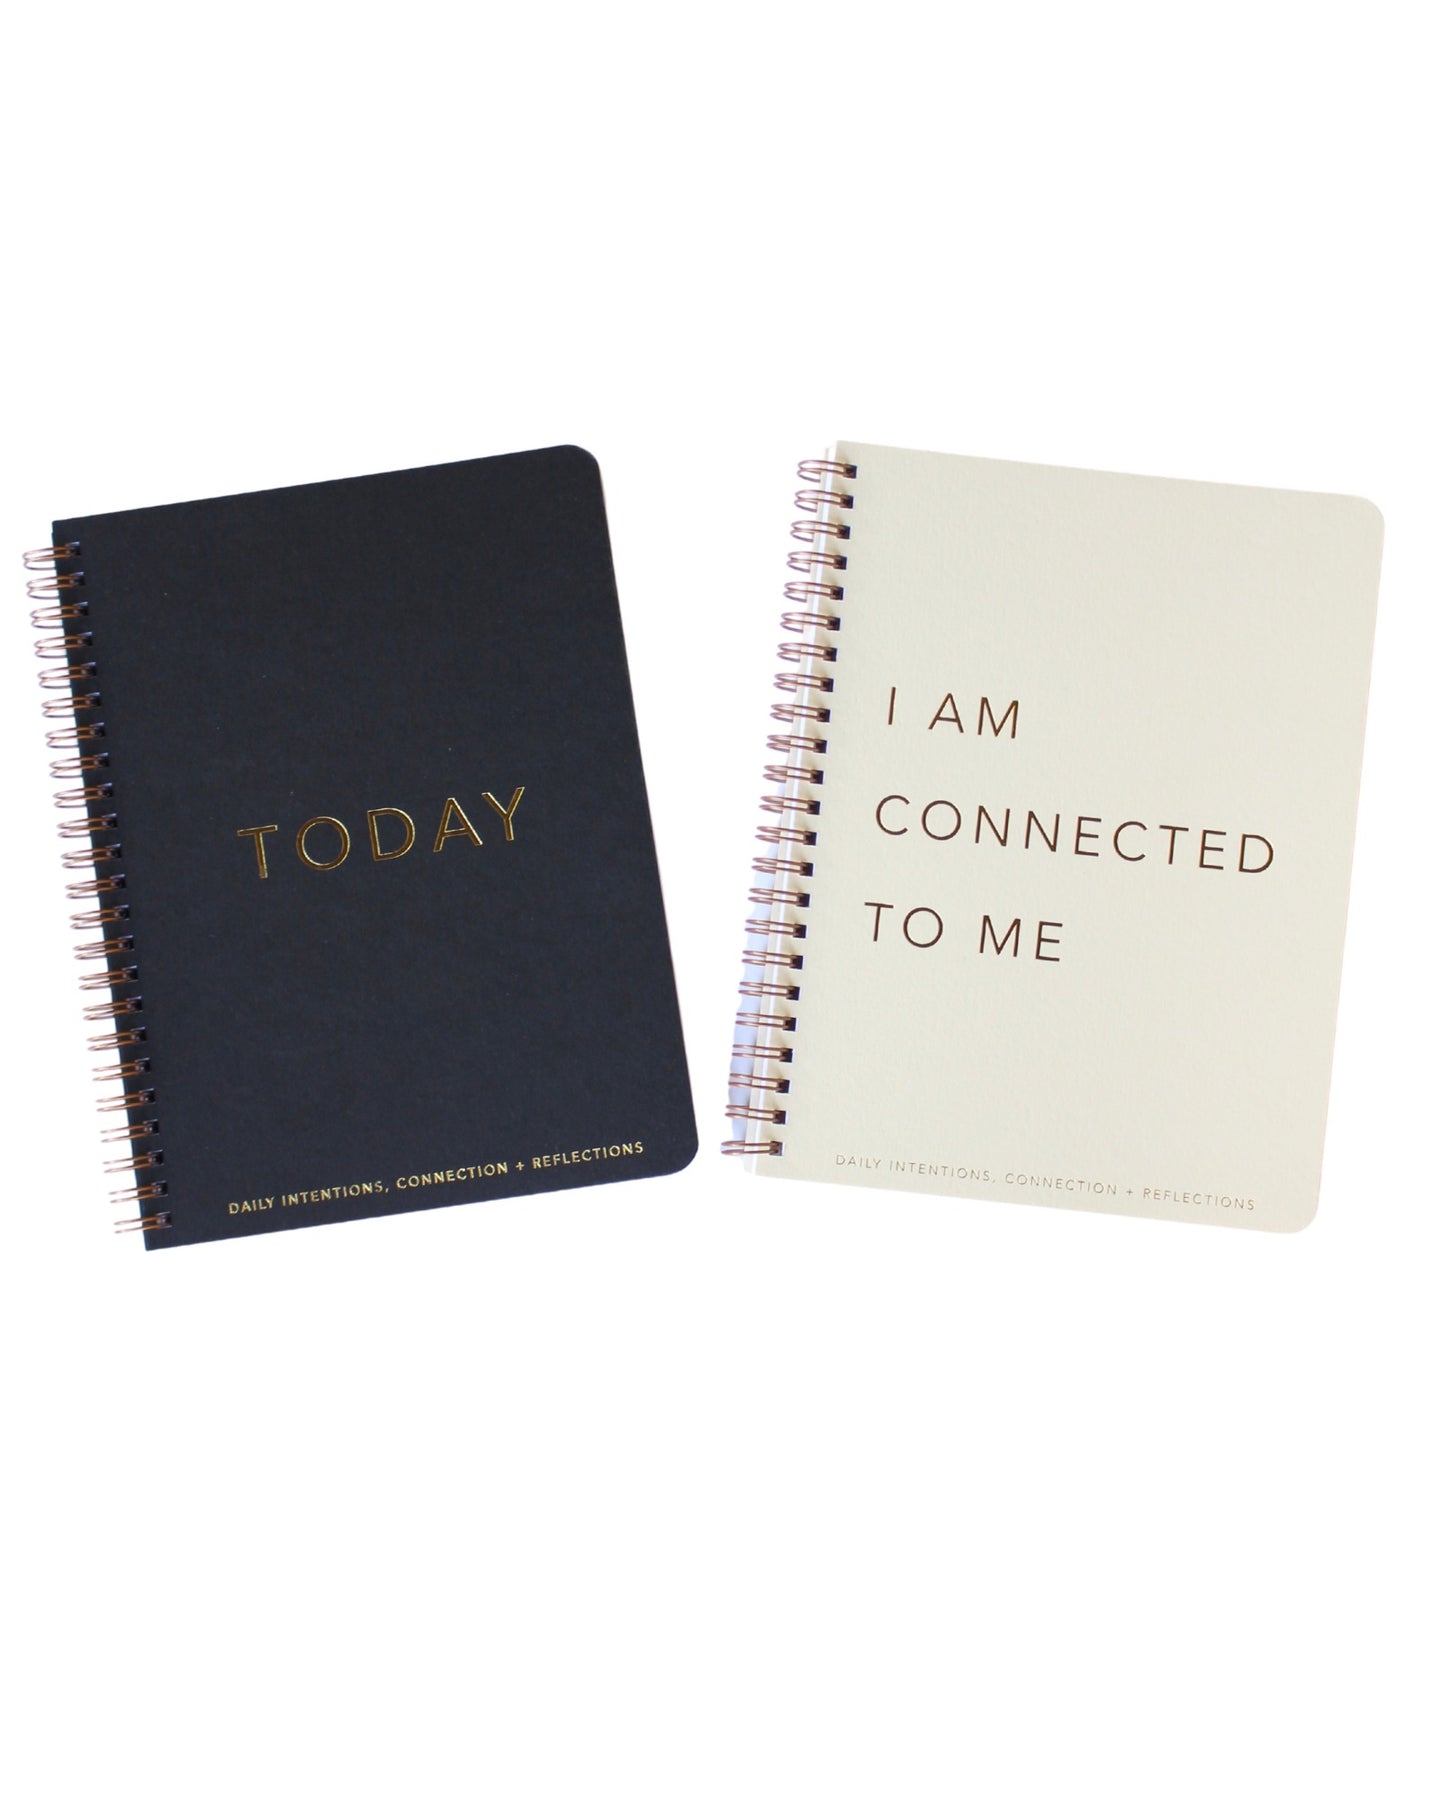 Today - Reflection Journal